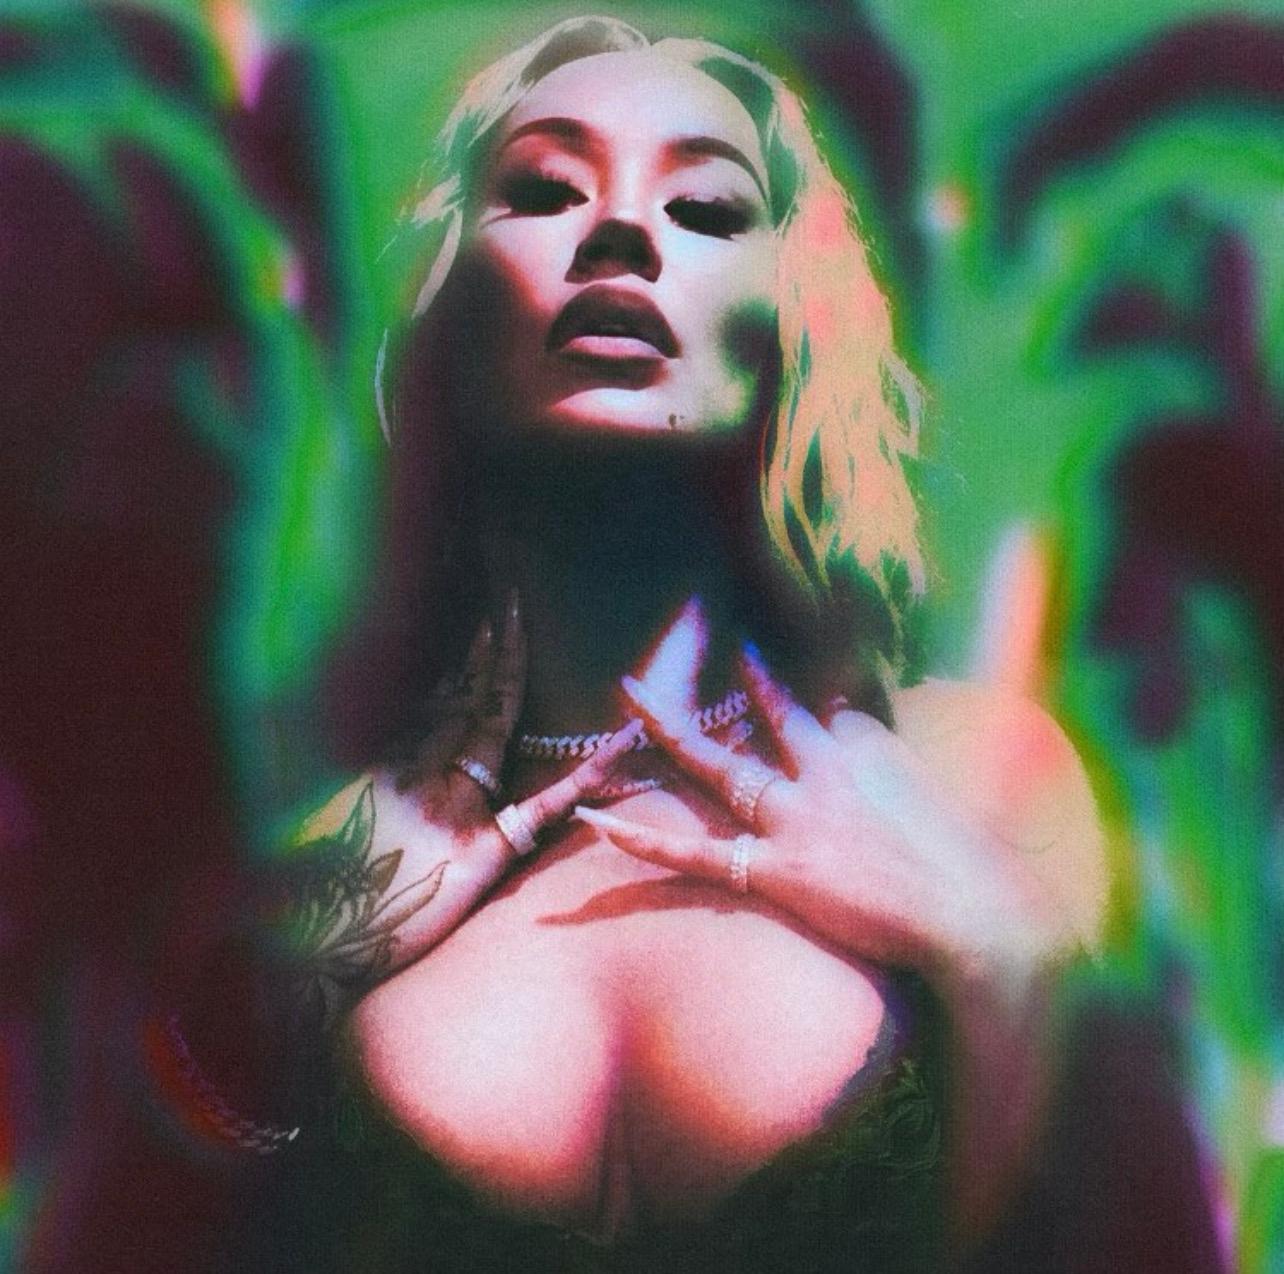 Iggy Azalea Draws Heat From Fans Over Unsatisfying OnlyFans Page